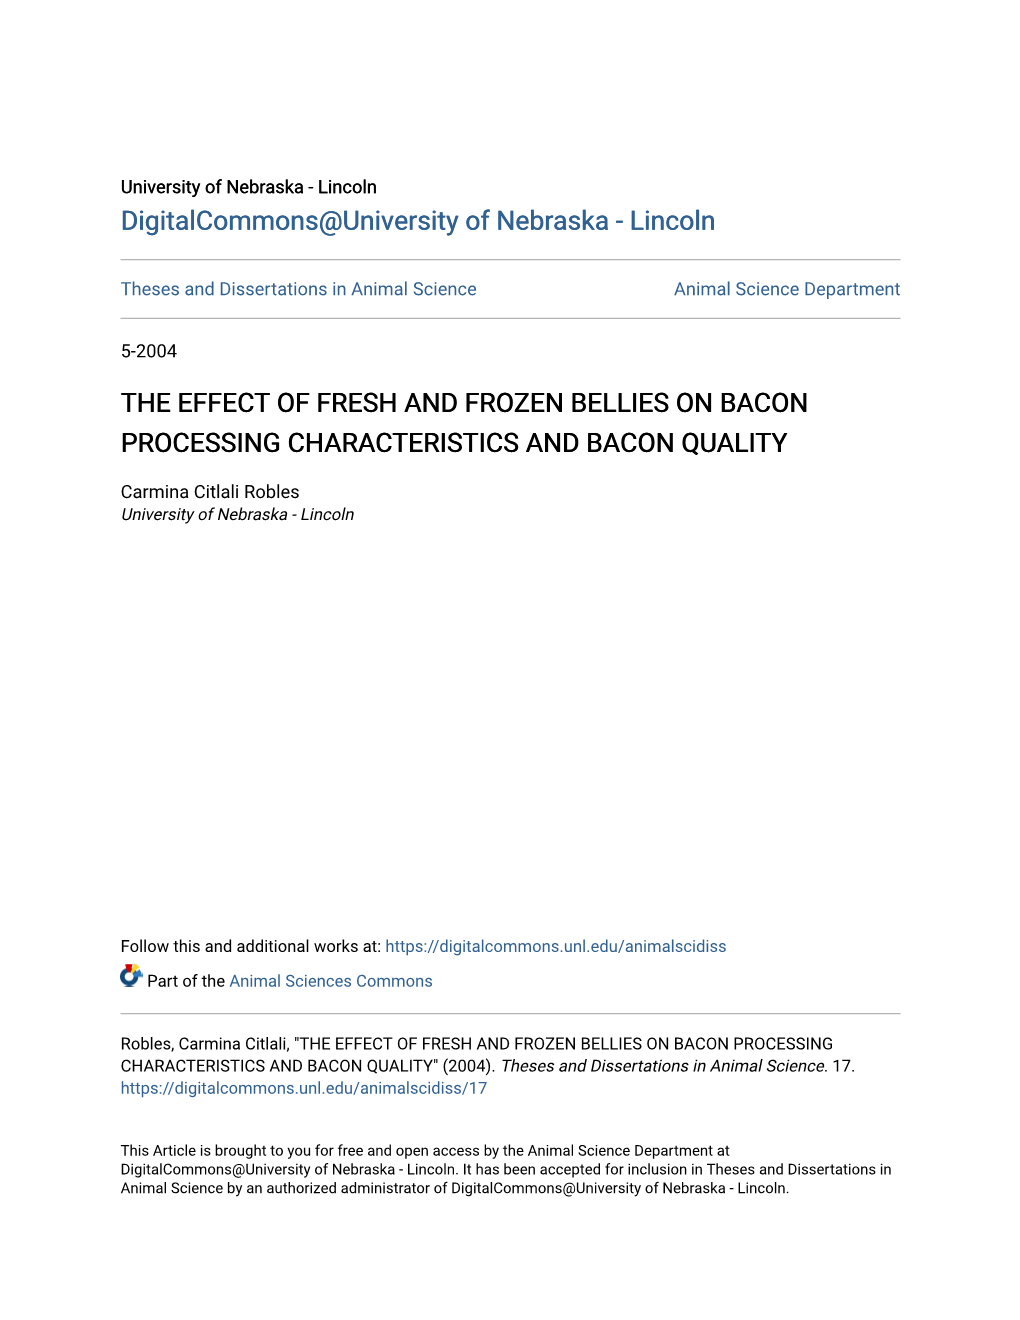 The Effect of Fresh and Frozen Bellies on Bacon Processing Characteristics and Bacon Quality